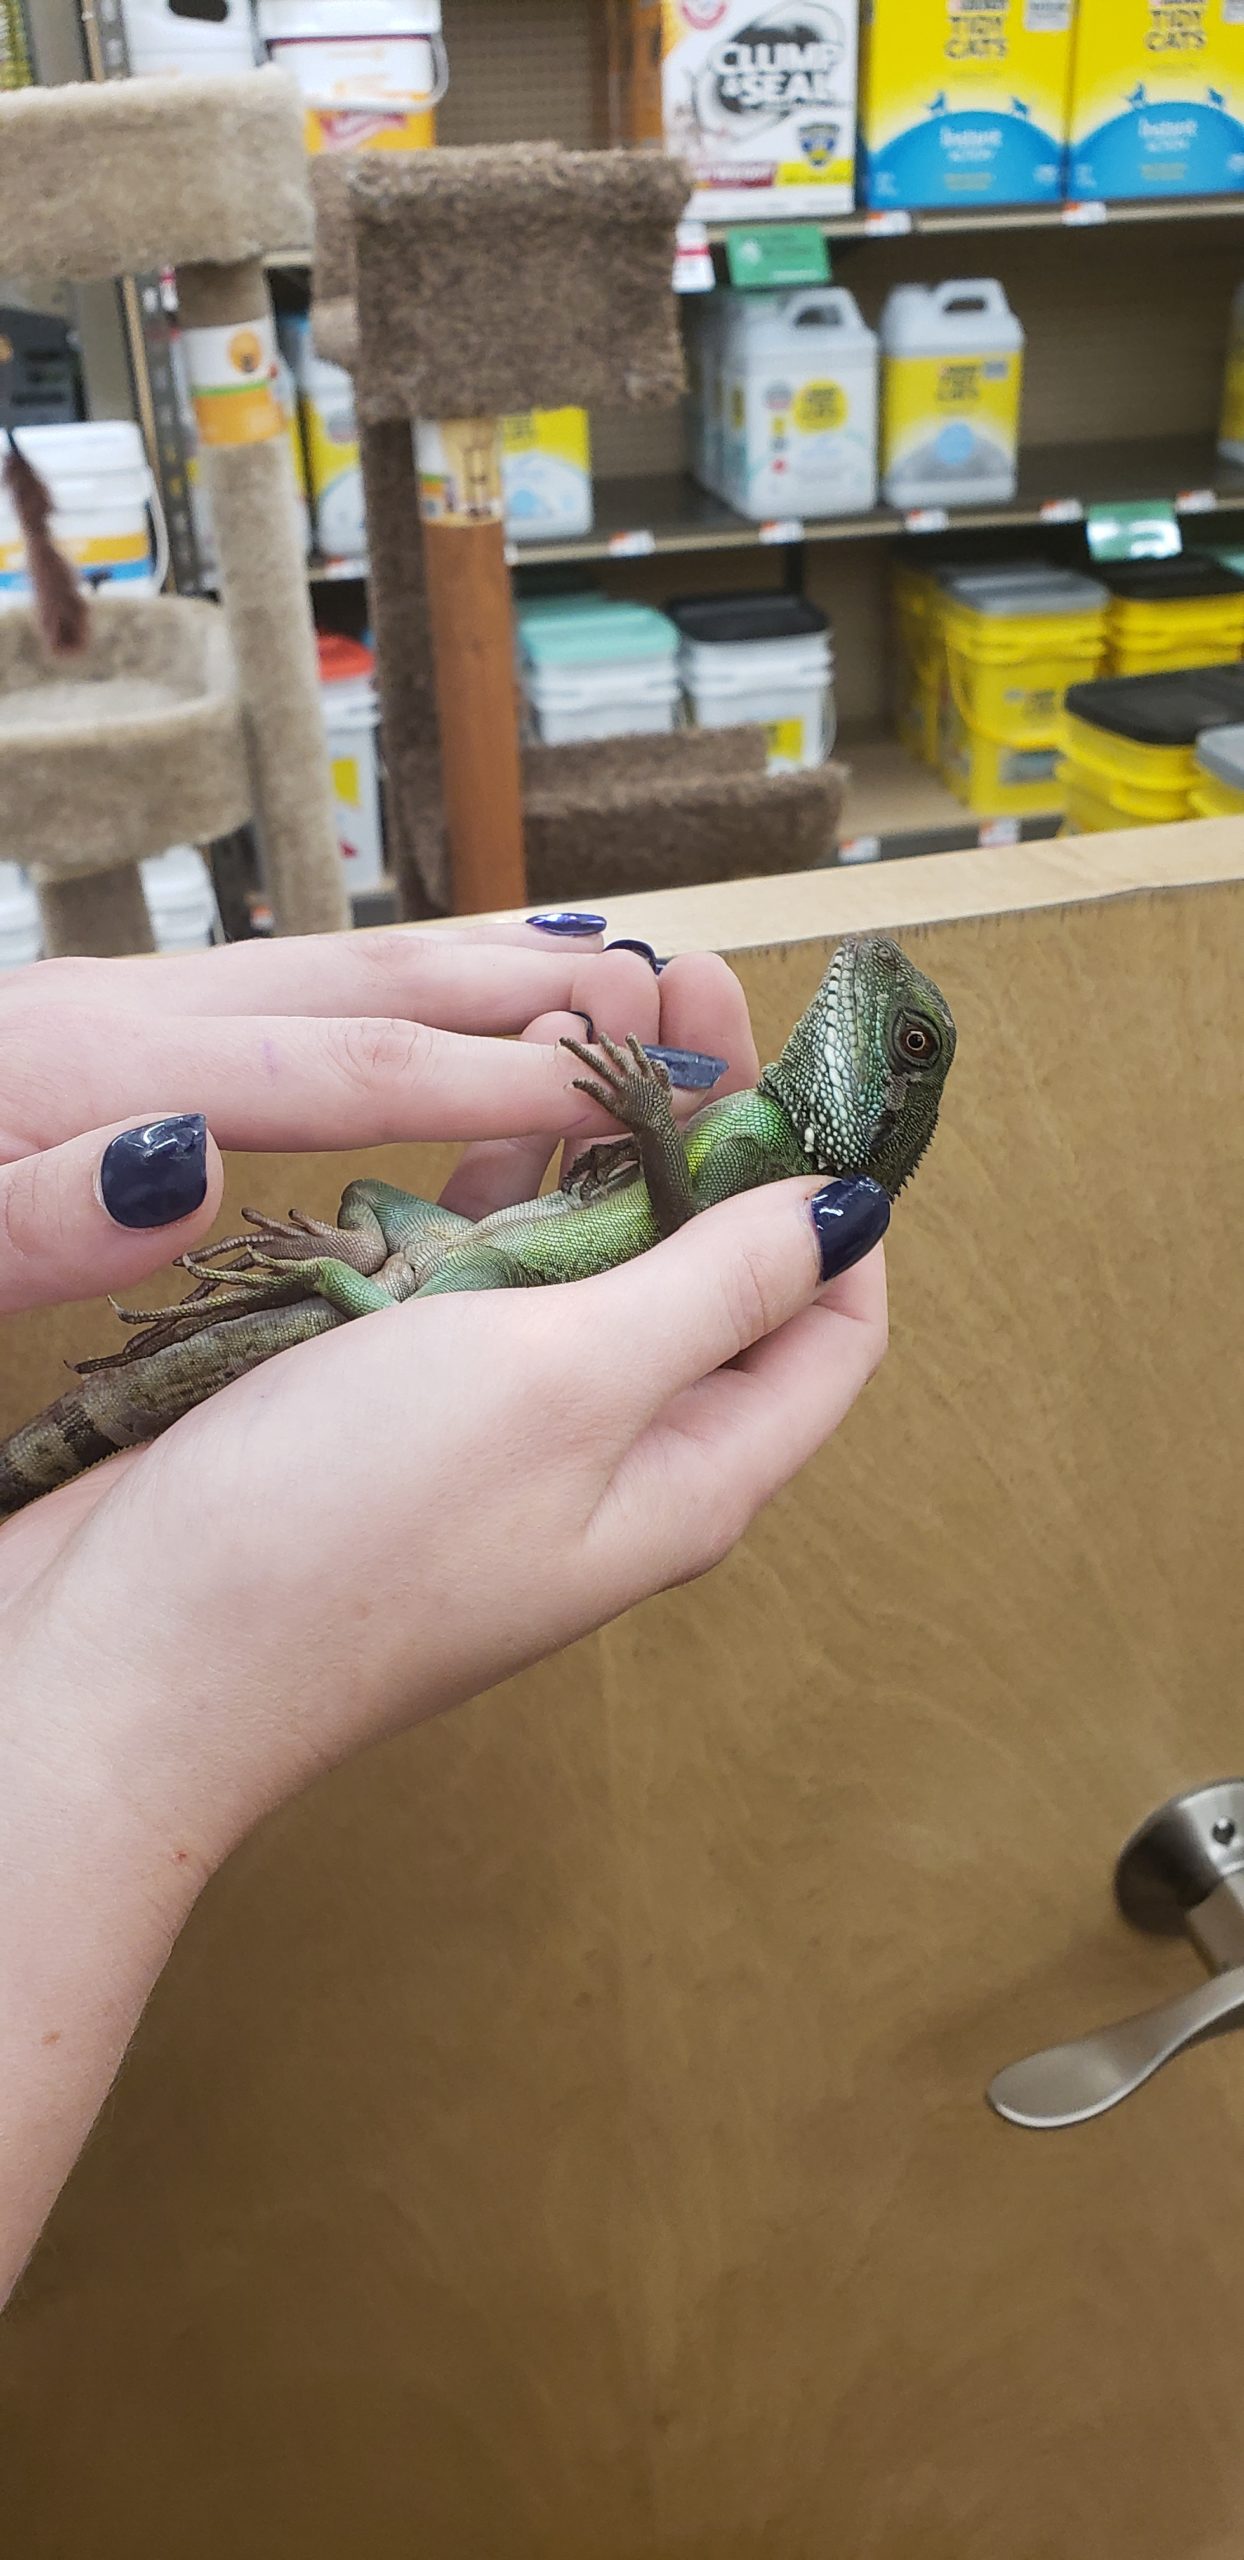 A lizard getting his nails professionally clipped.